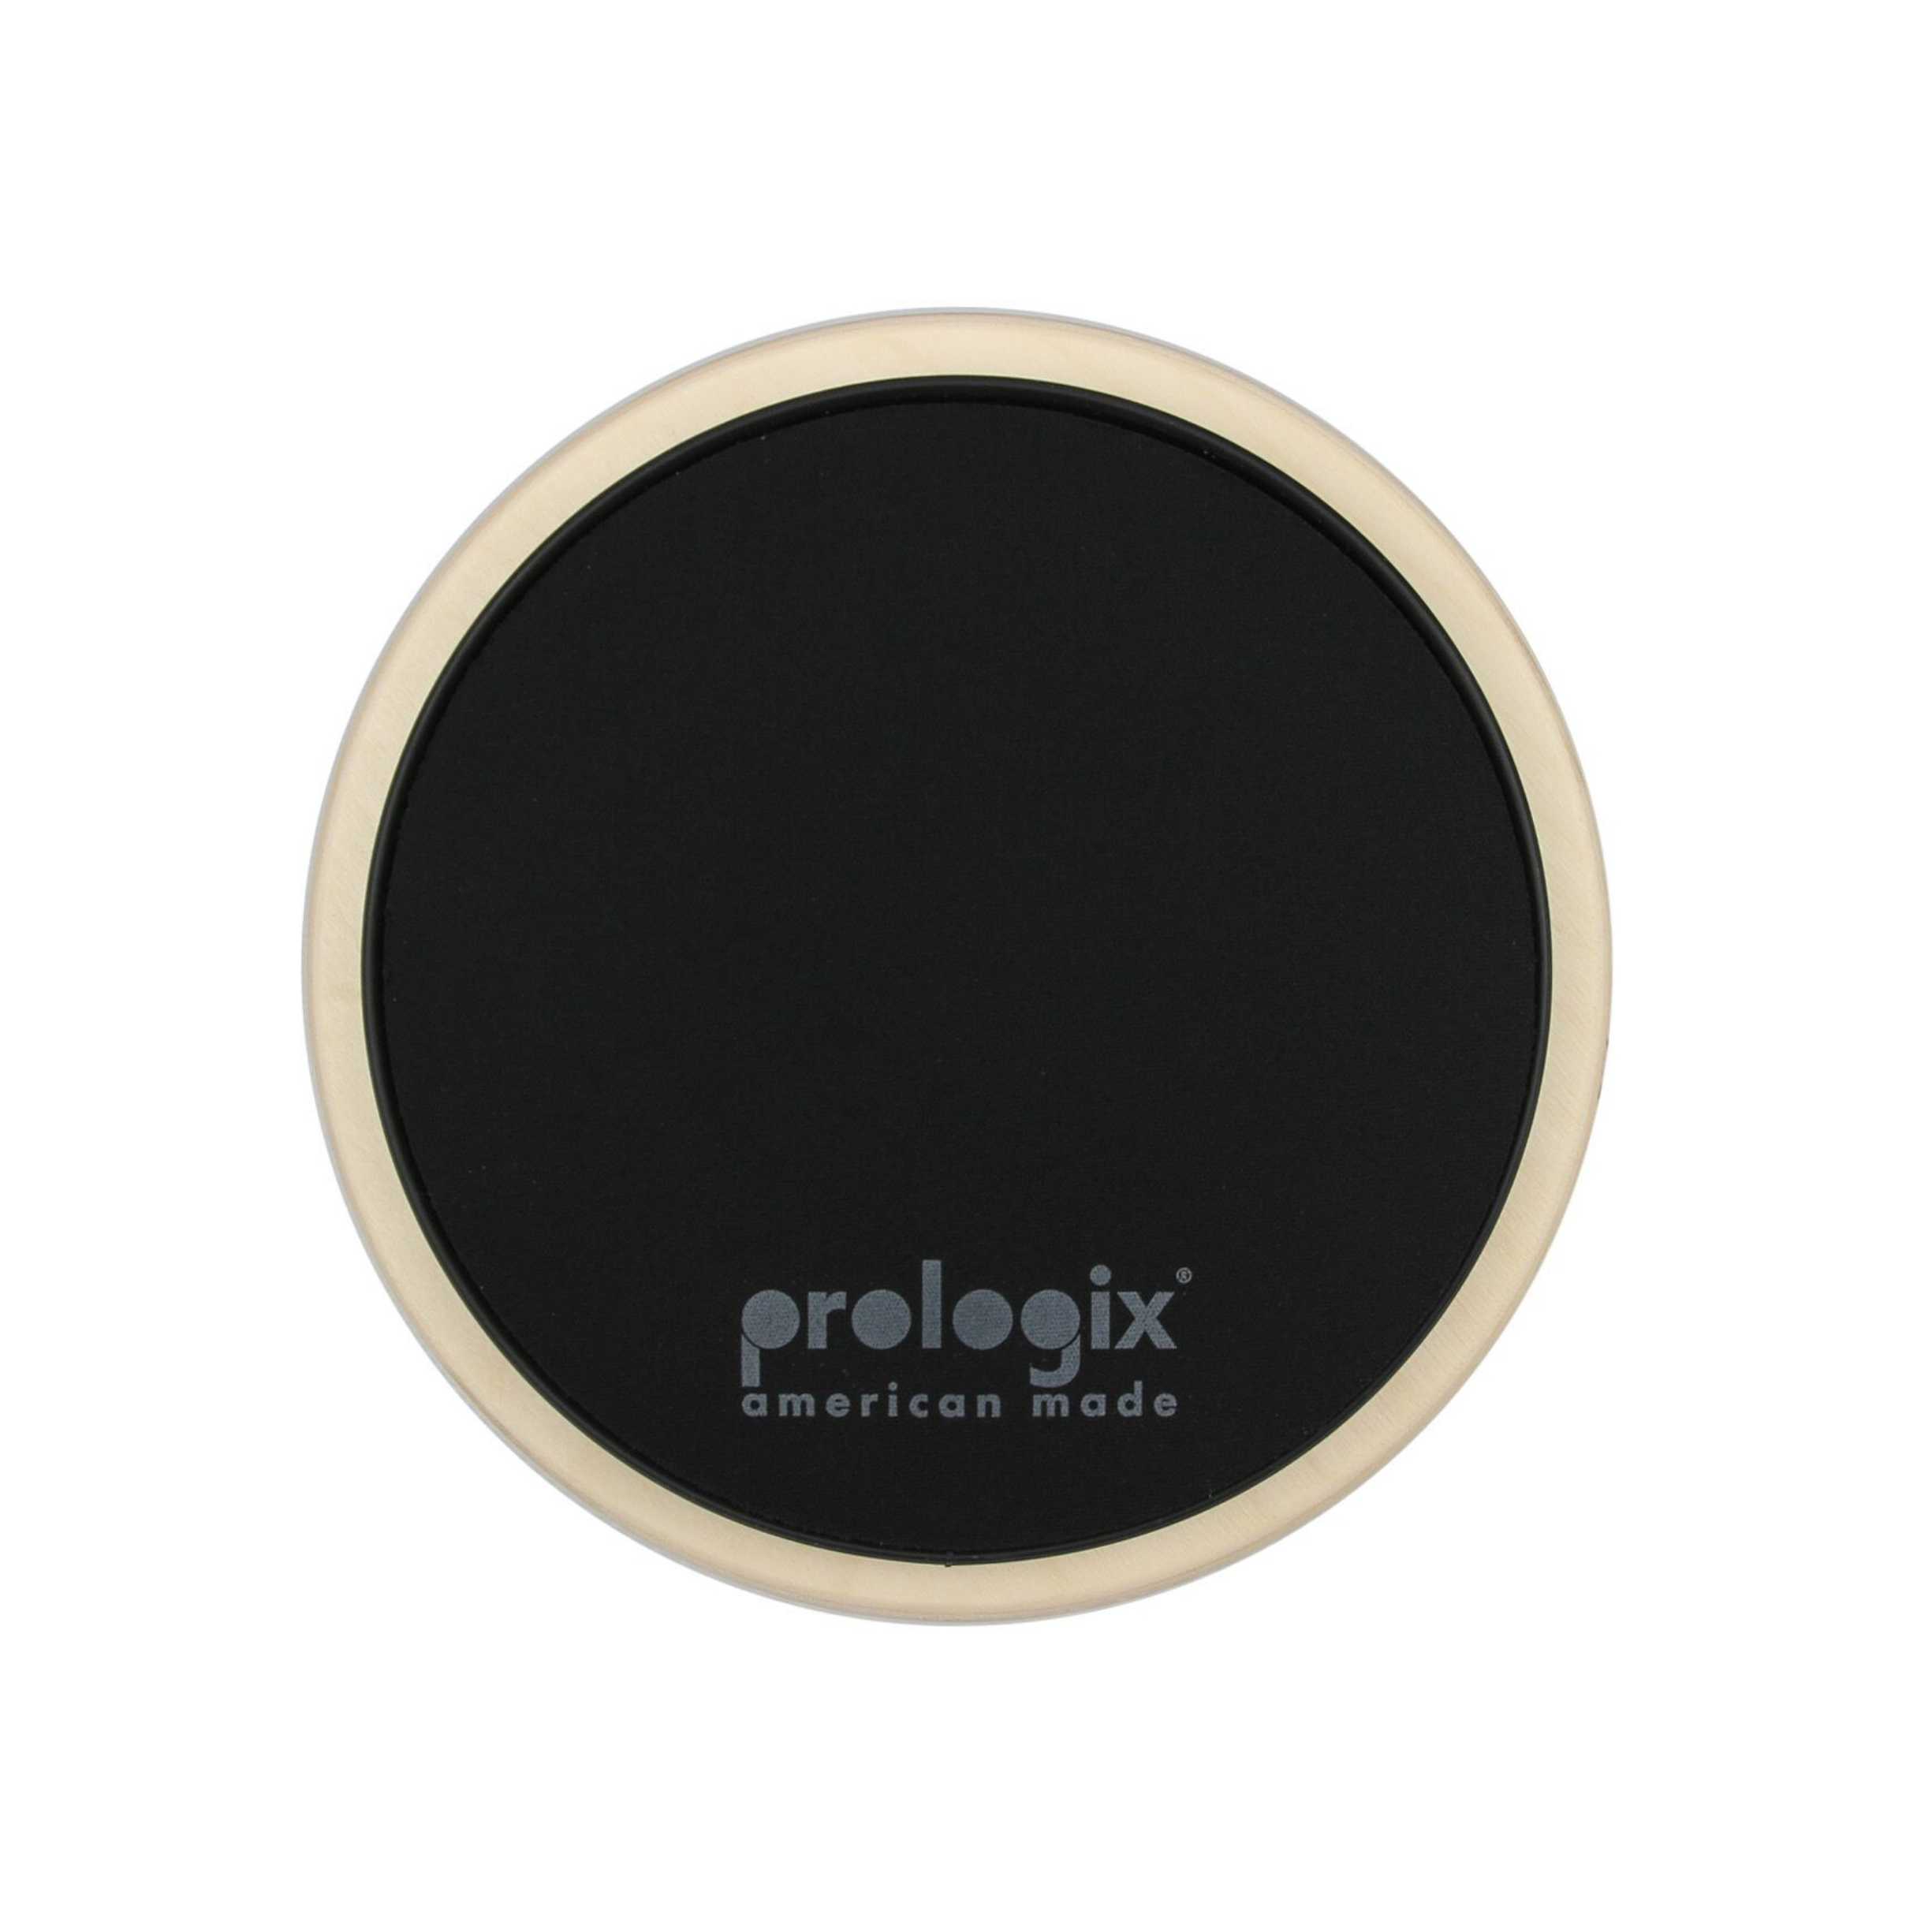 Prologix Black Out Pad 8" with Rim Extreme Resistance